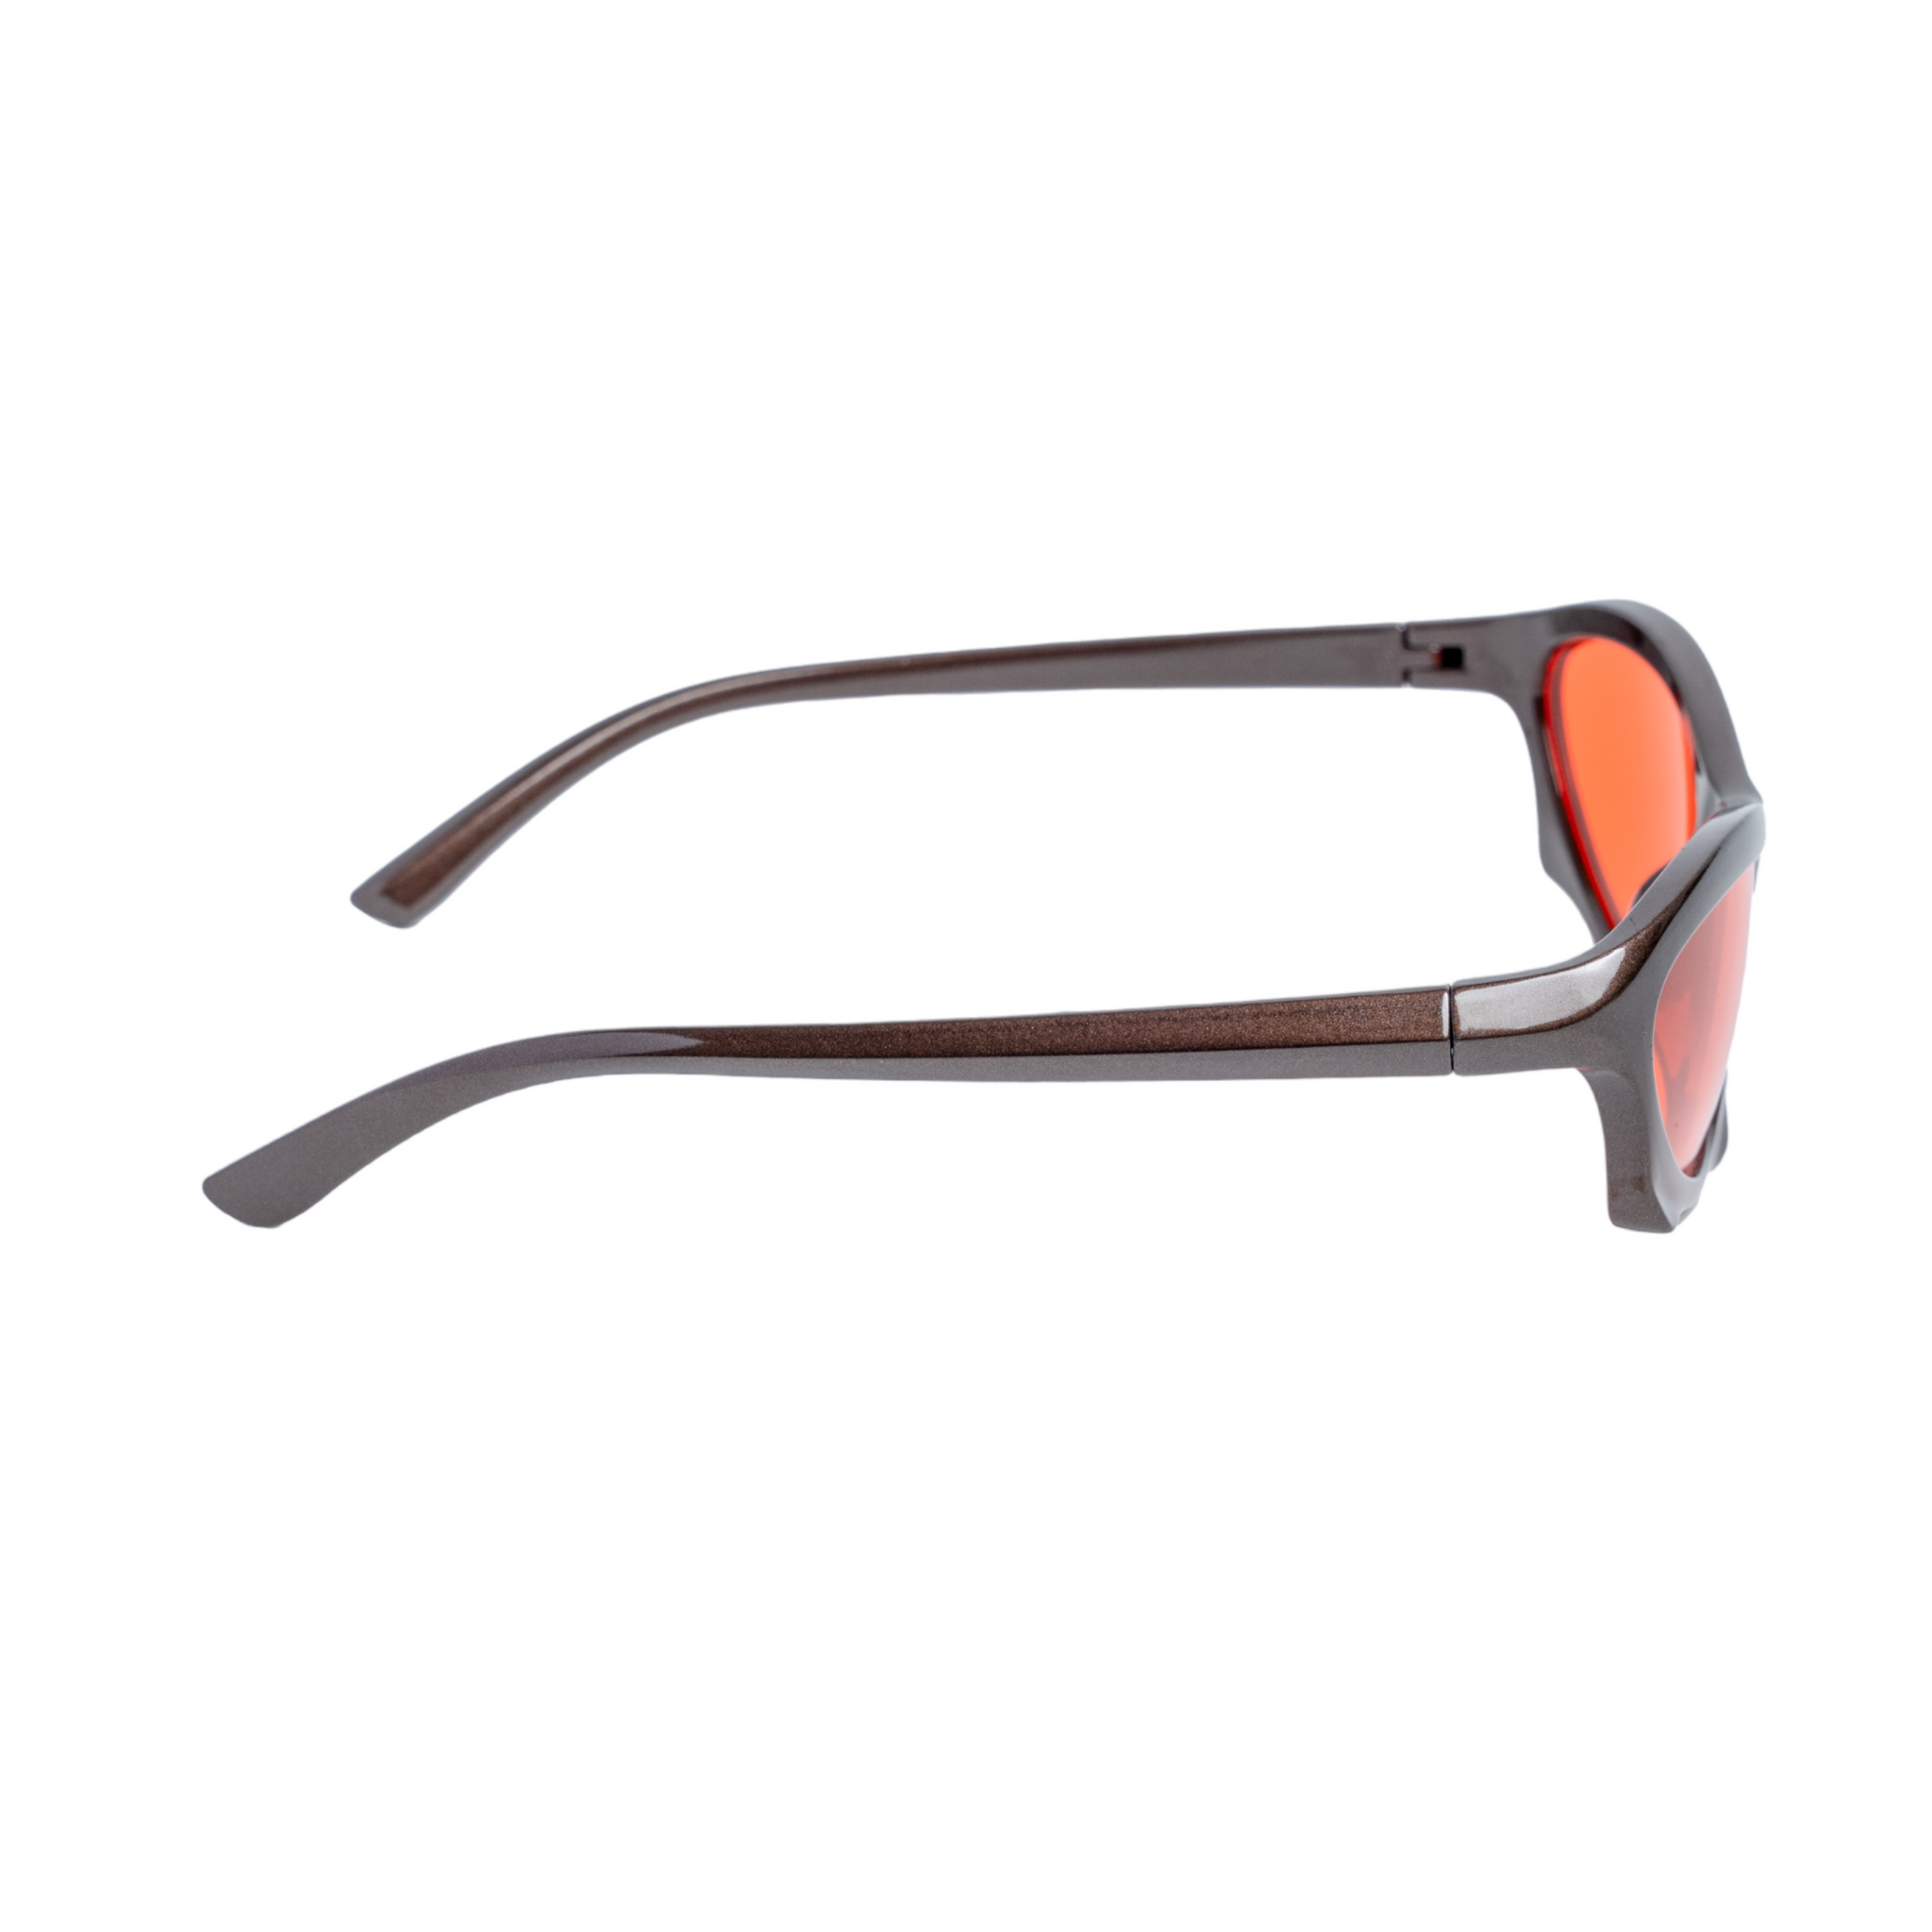 Chokore Trendy & Functional Polarized Sunglasses (Brown & Red)